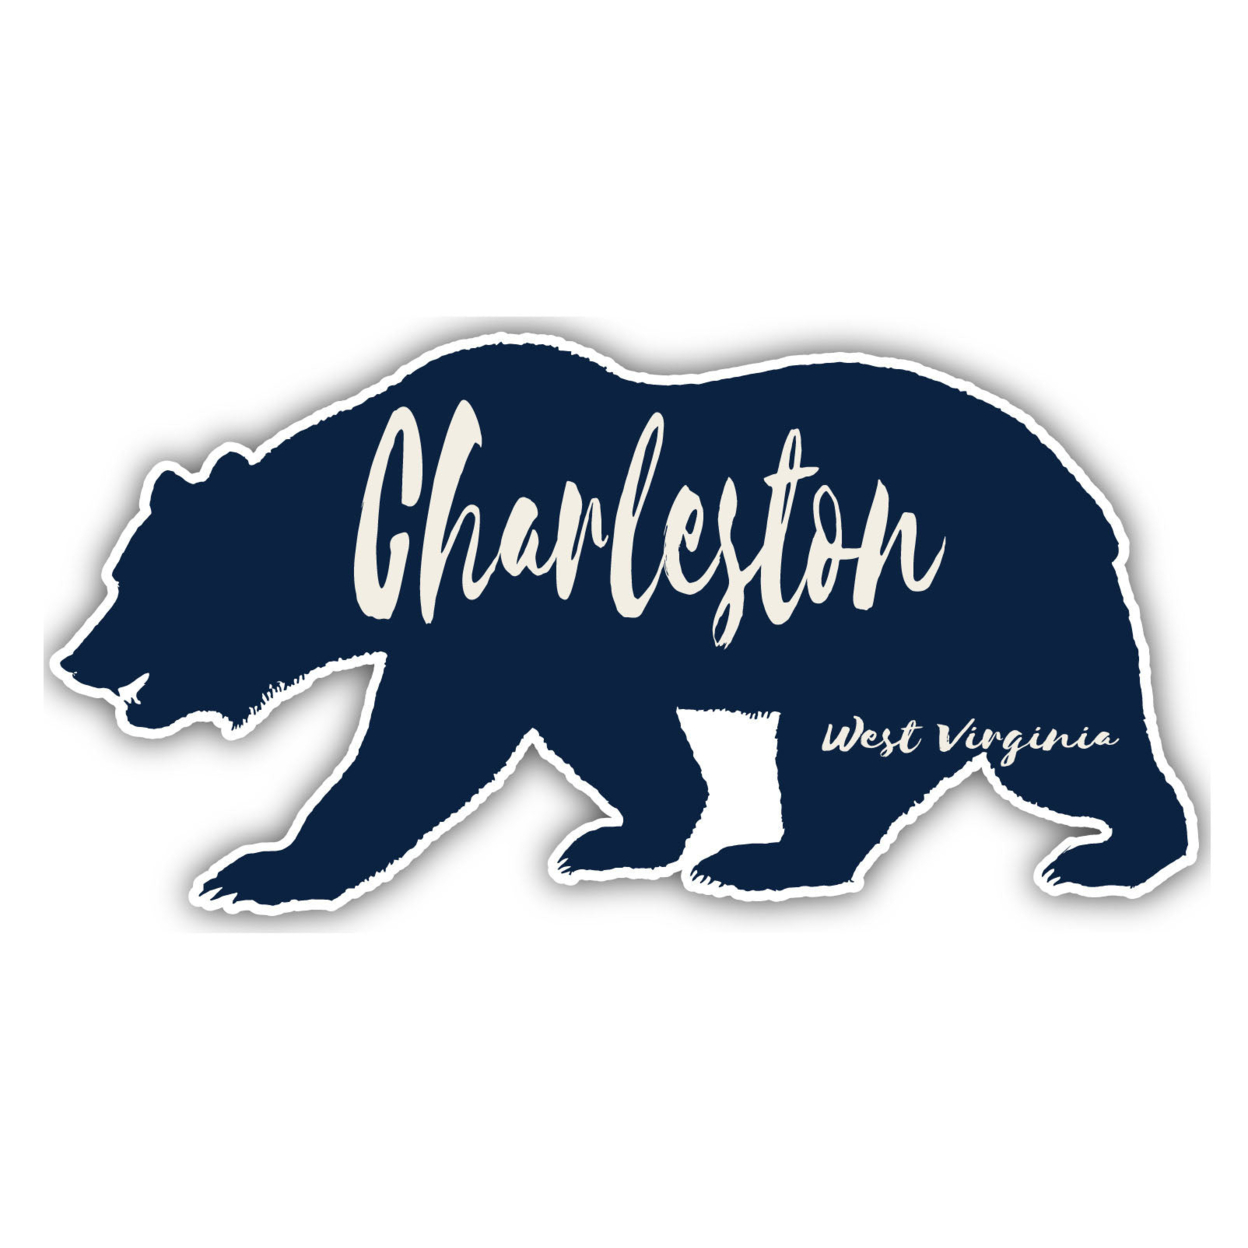 Charleston West Virginia Souvenir Decorative Stickers (Choose Theme And Size) - 4-Pack, 8-Inch, Tent